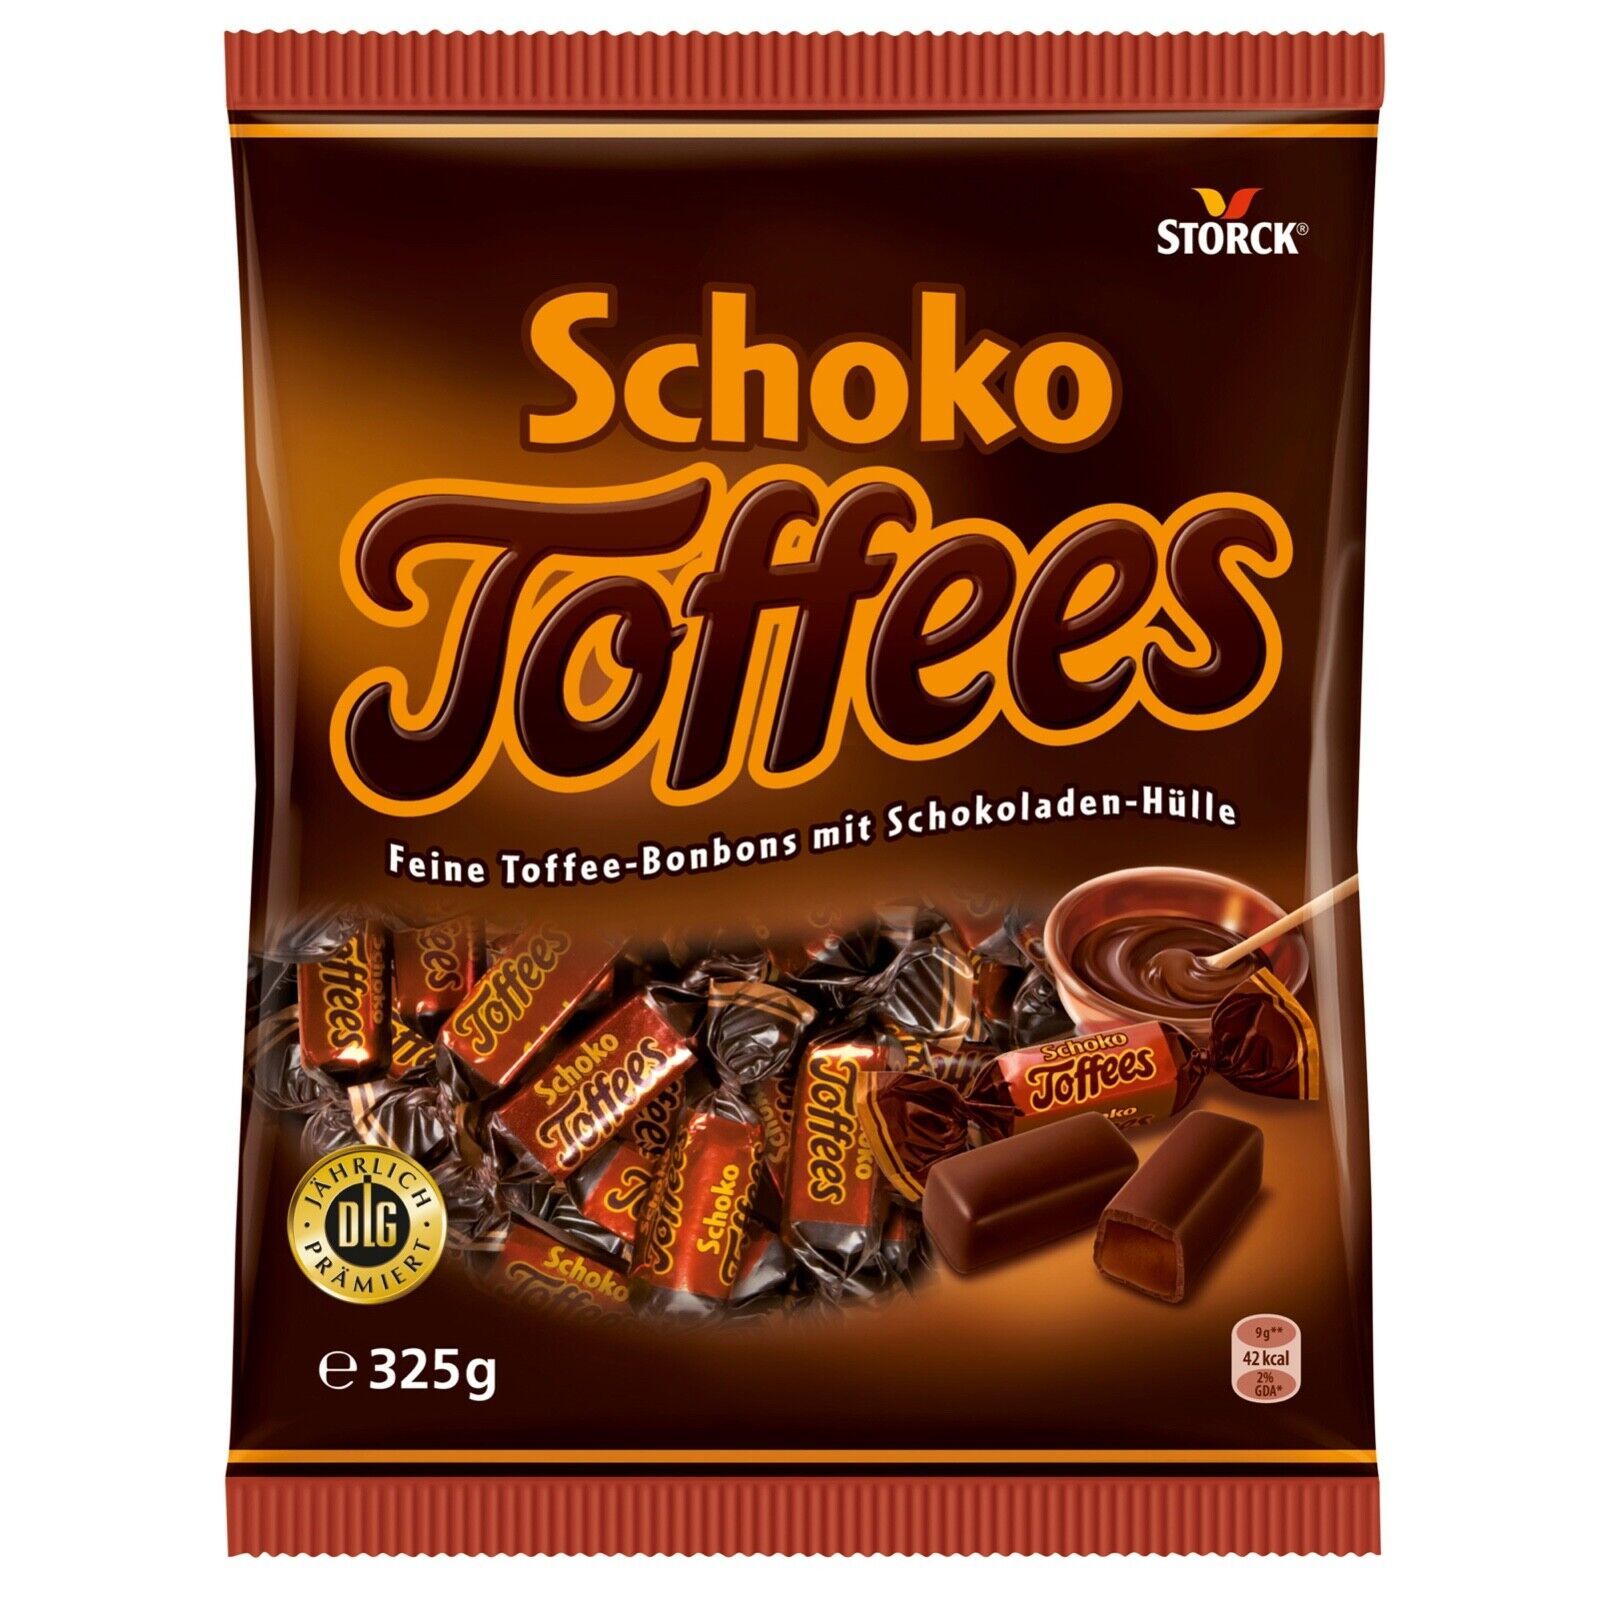 Storck Schoko Toffees European toffee candy 325g -Made in Germany-FREE SHIPPING - £11.29 GBP